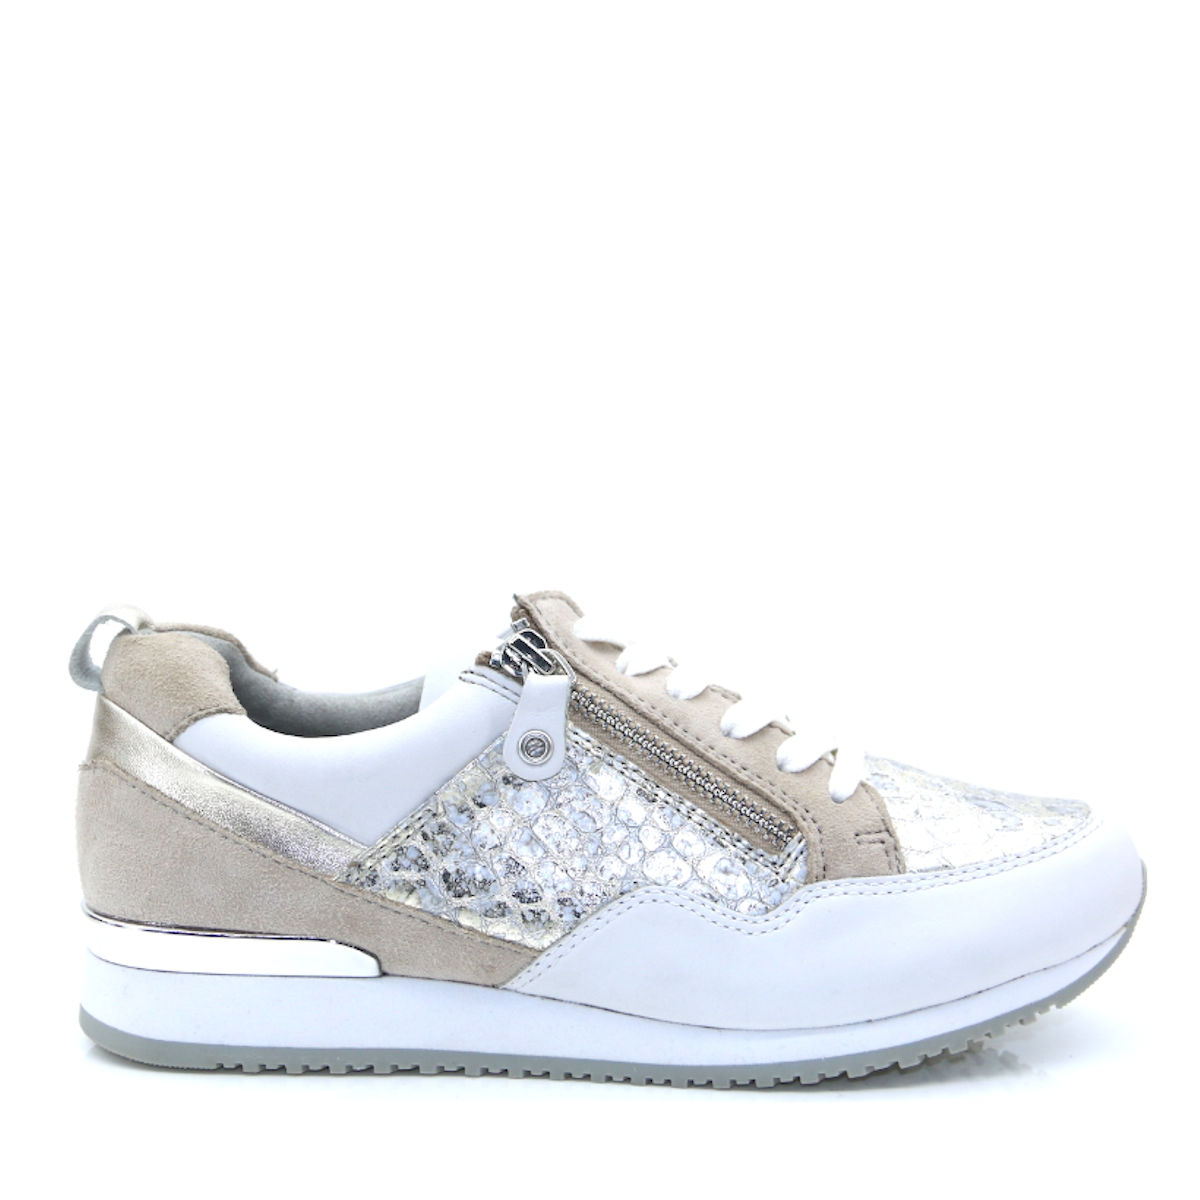 Caprice Ladies White/Silver Patent Leather Trainer | County Shoes ...